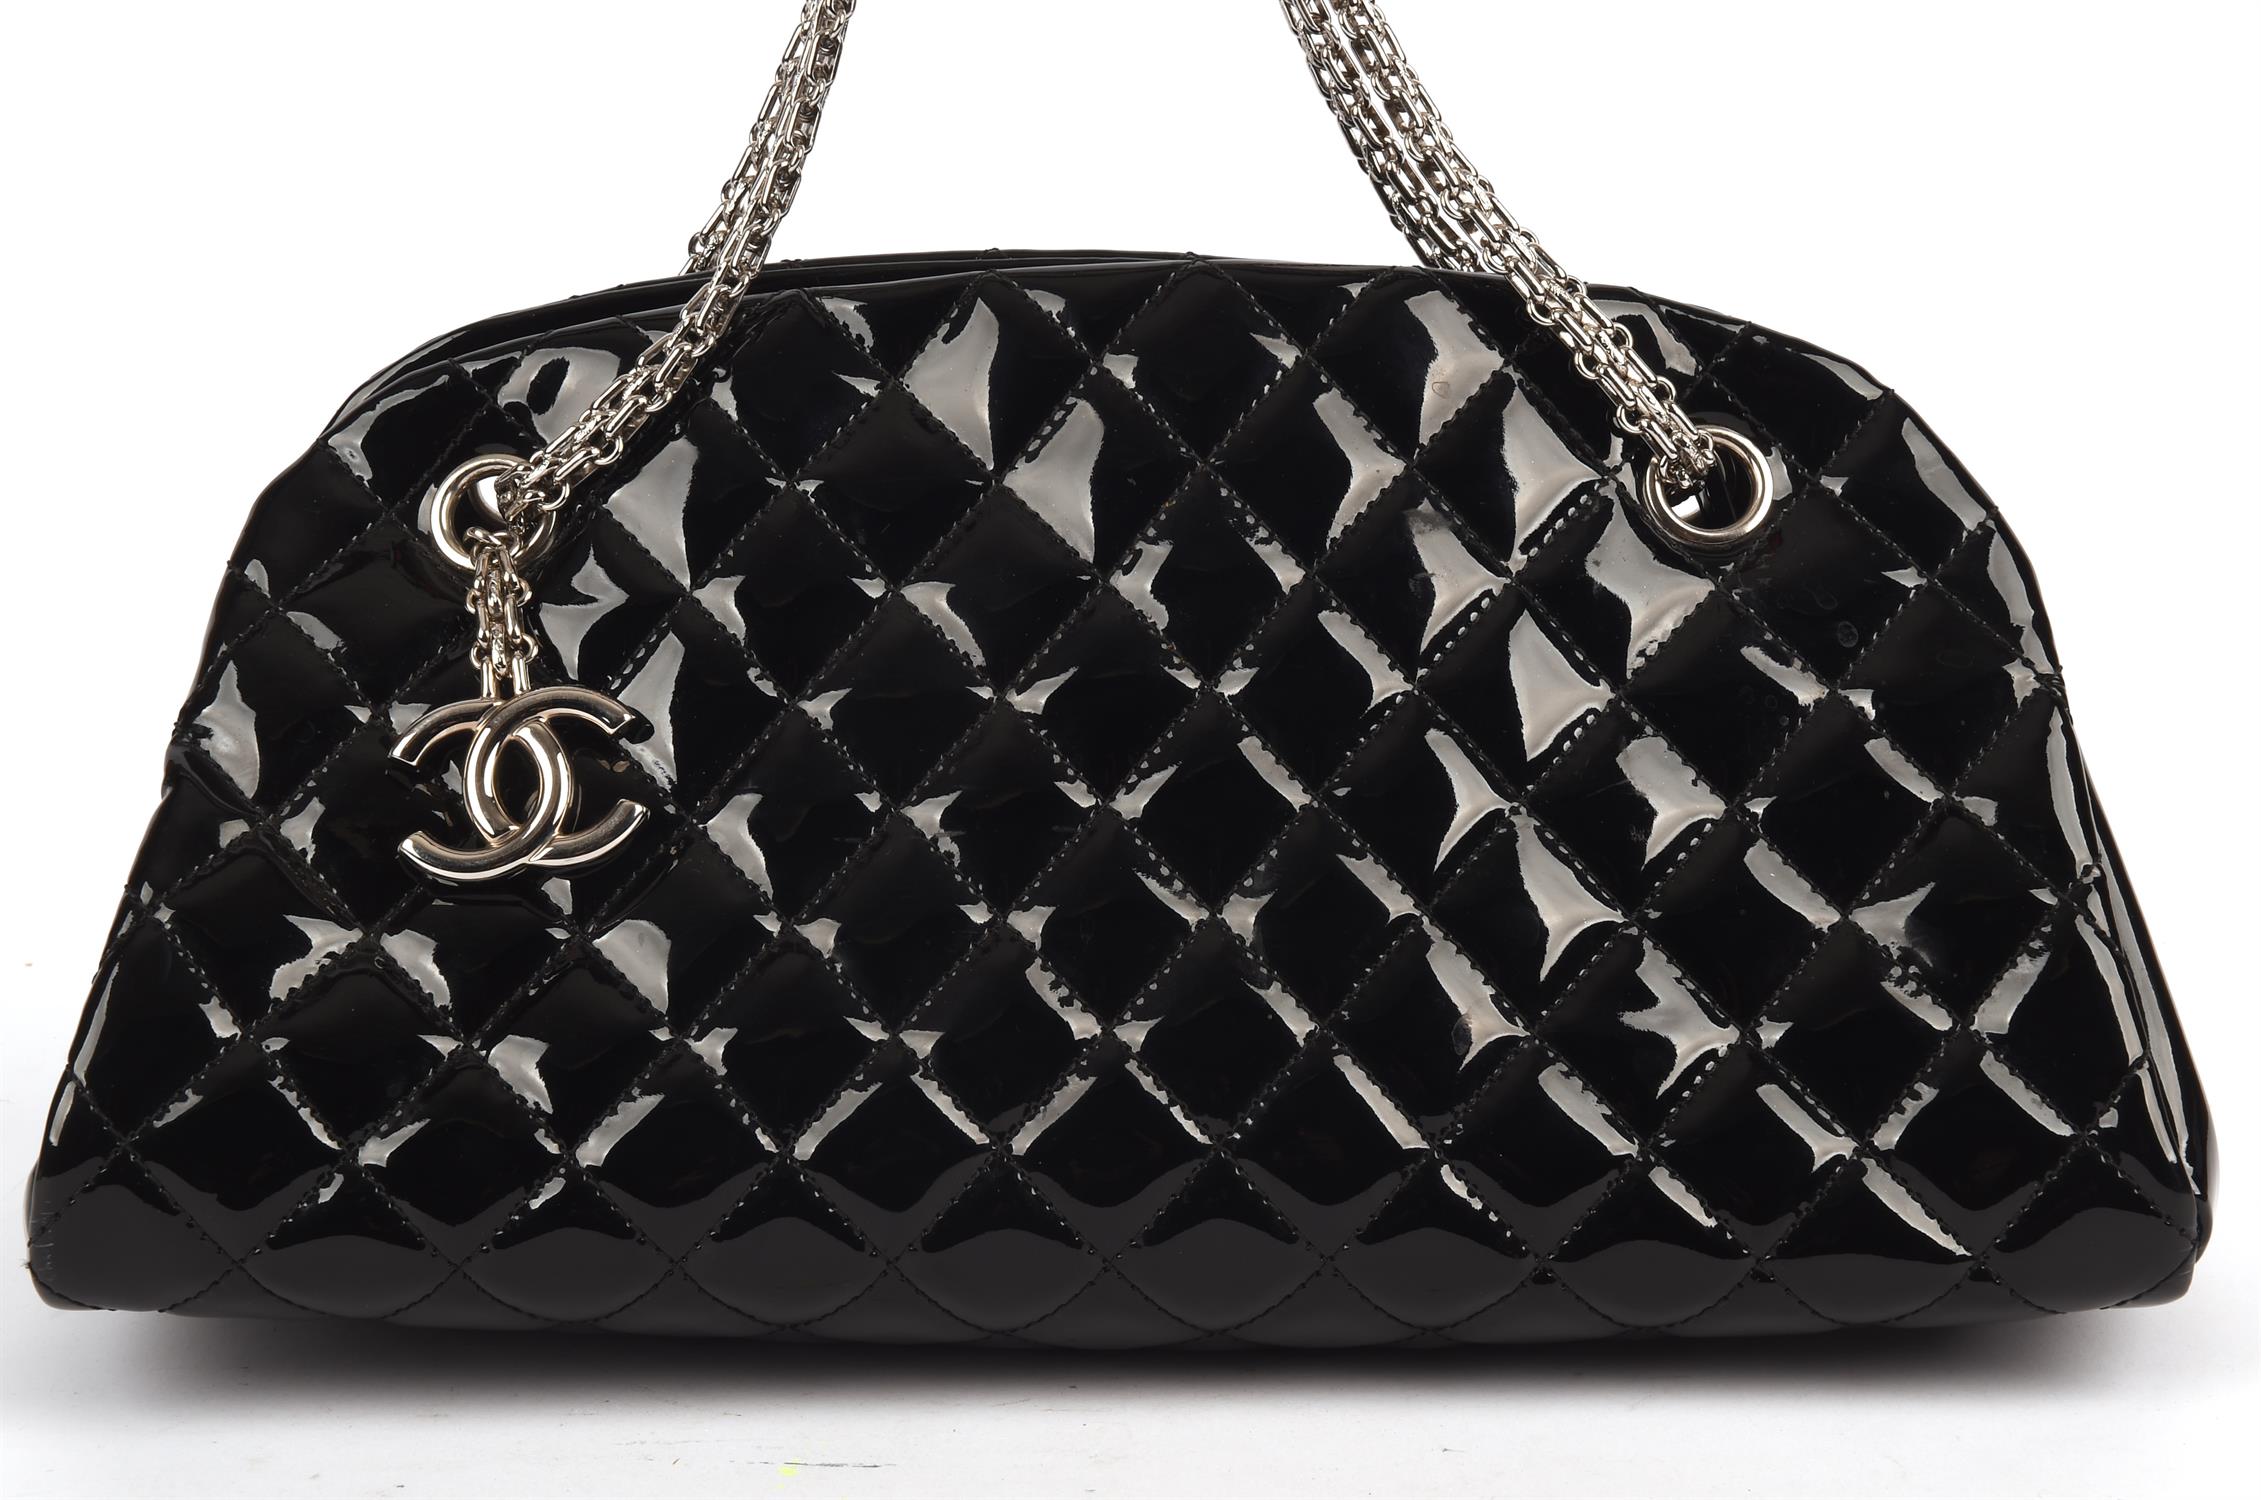 CHANEL quilted black patent Mademoiselle handbag with silver hardware and burgundy canvas interior. - Image 2 of 8